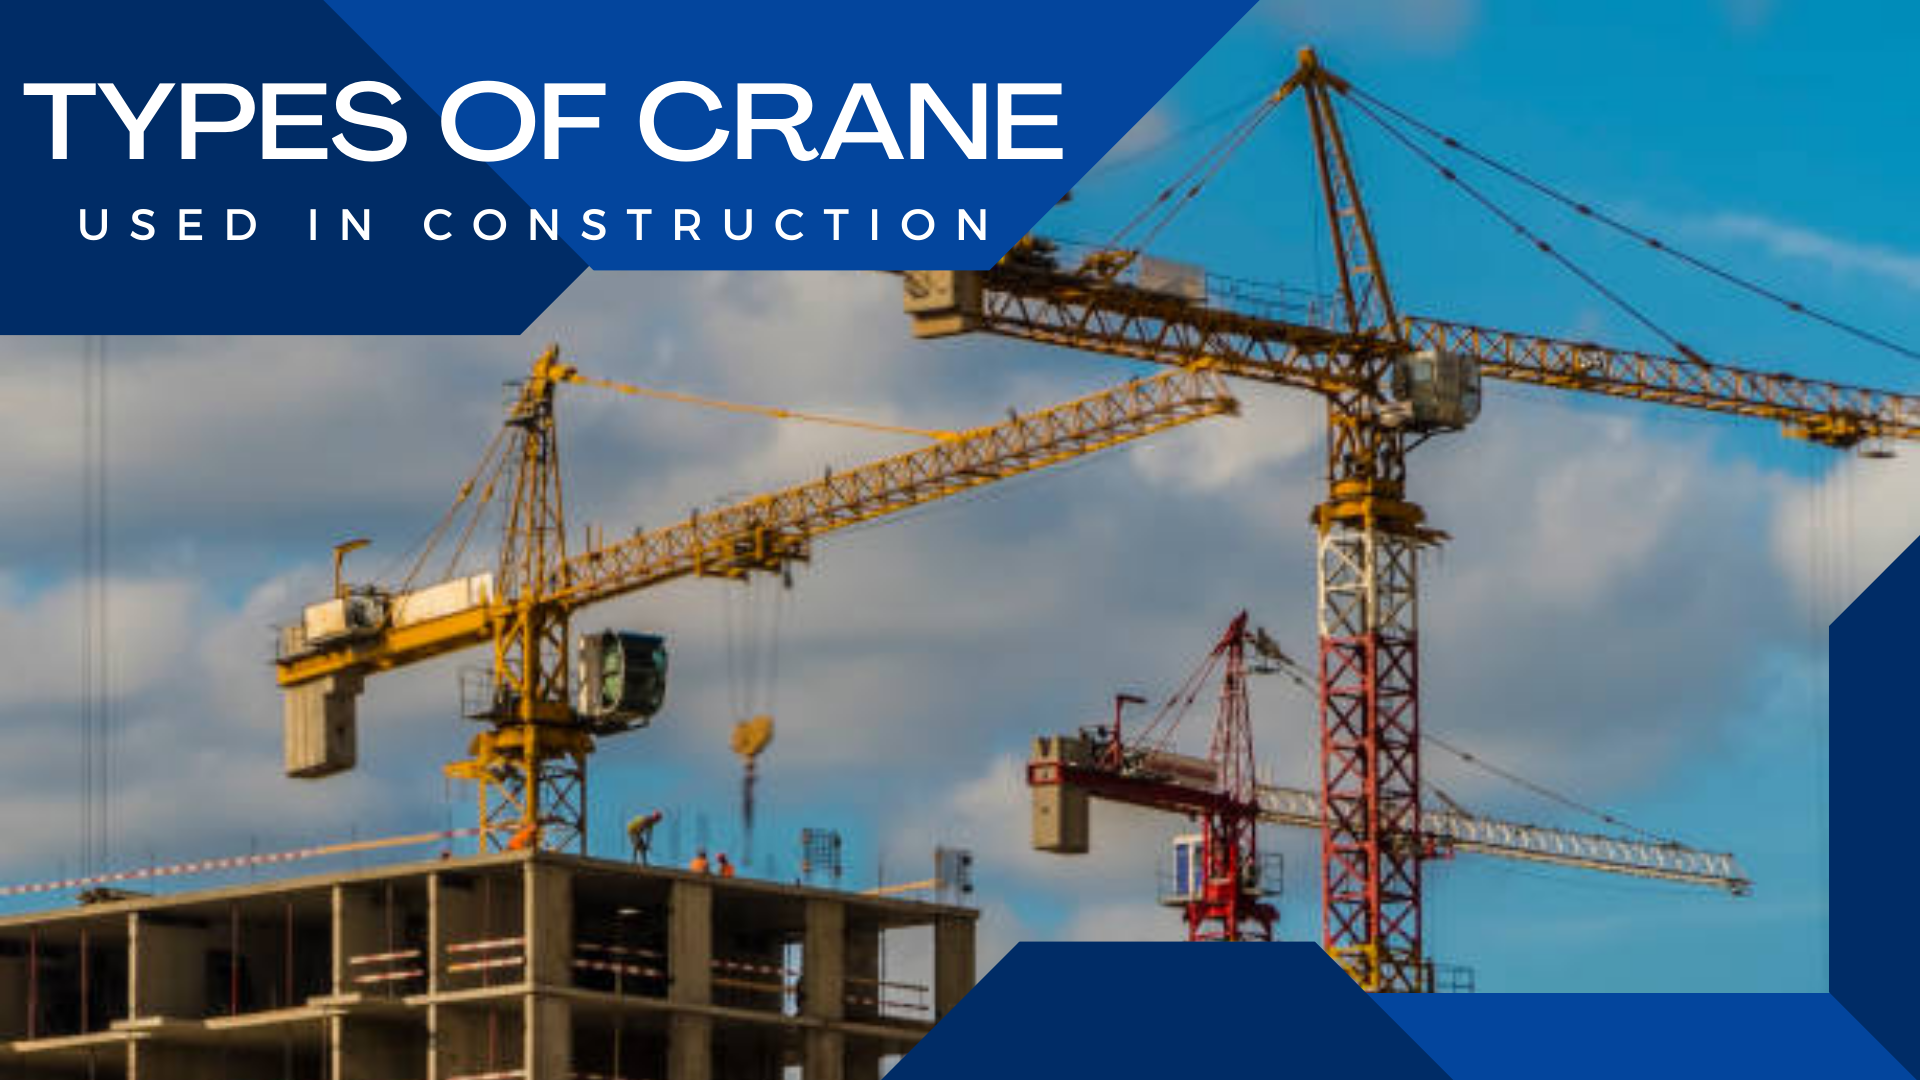 Types of Cranes Used in Construction